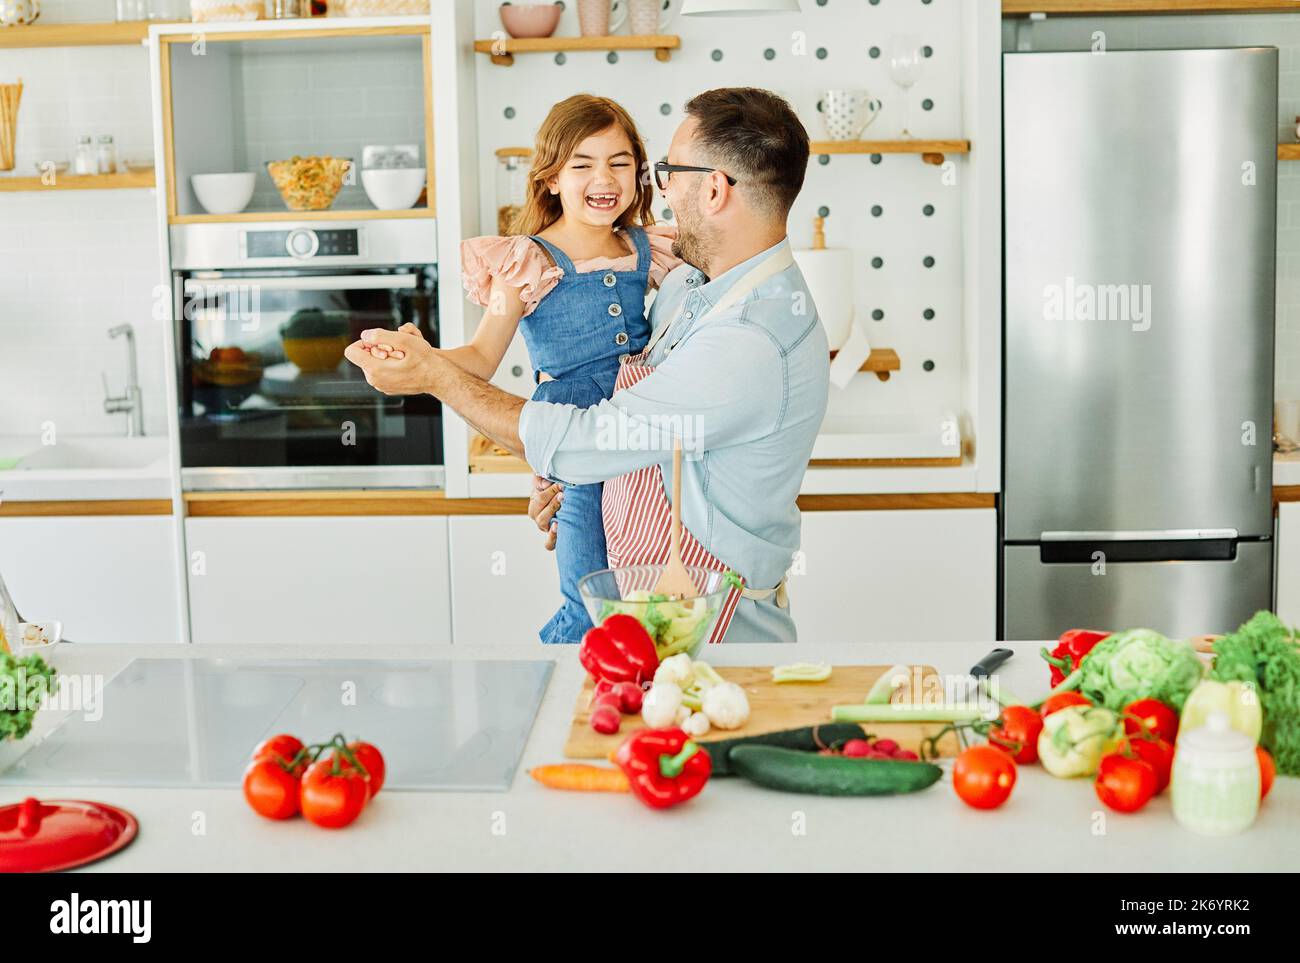 daughter father kitchen food preparing cooking child bonding happy girl together home parent dancing fun Stock Photo